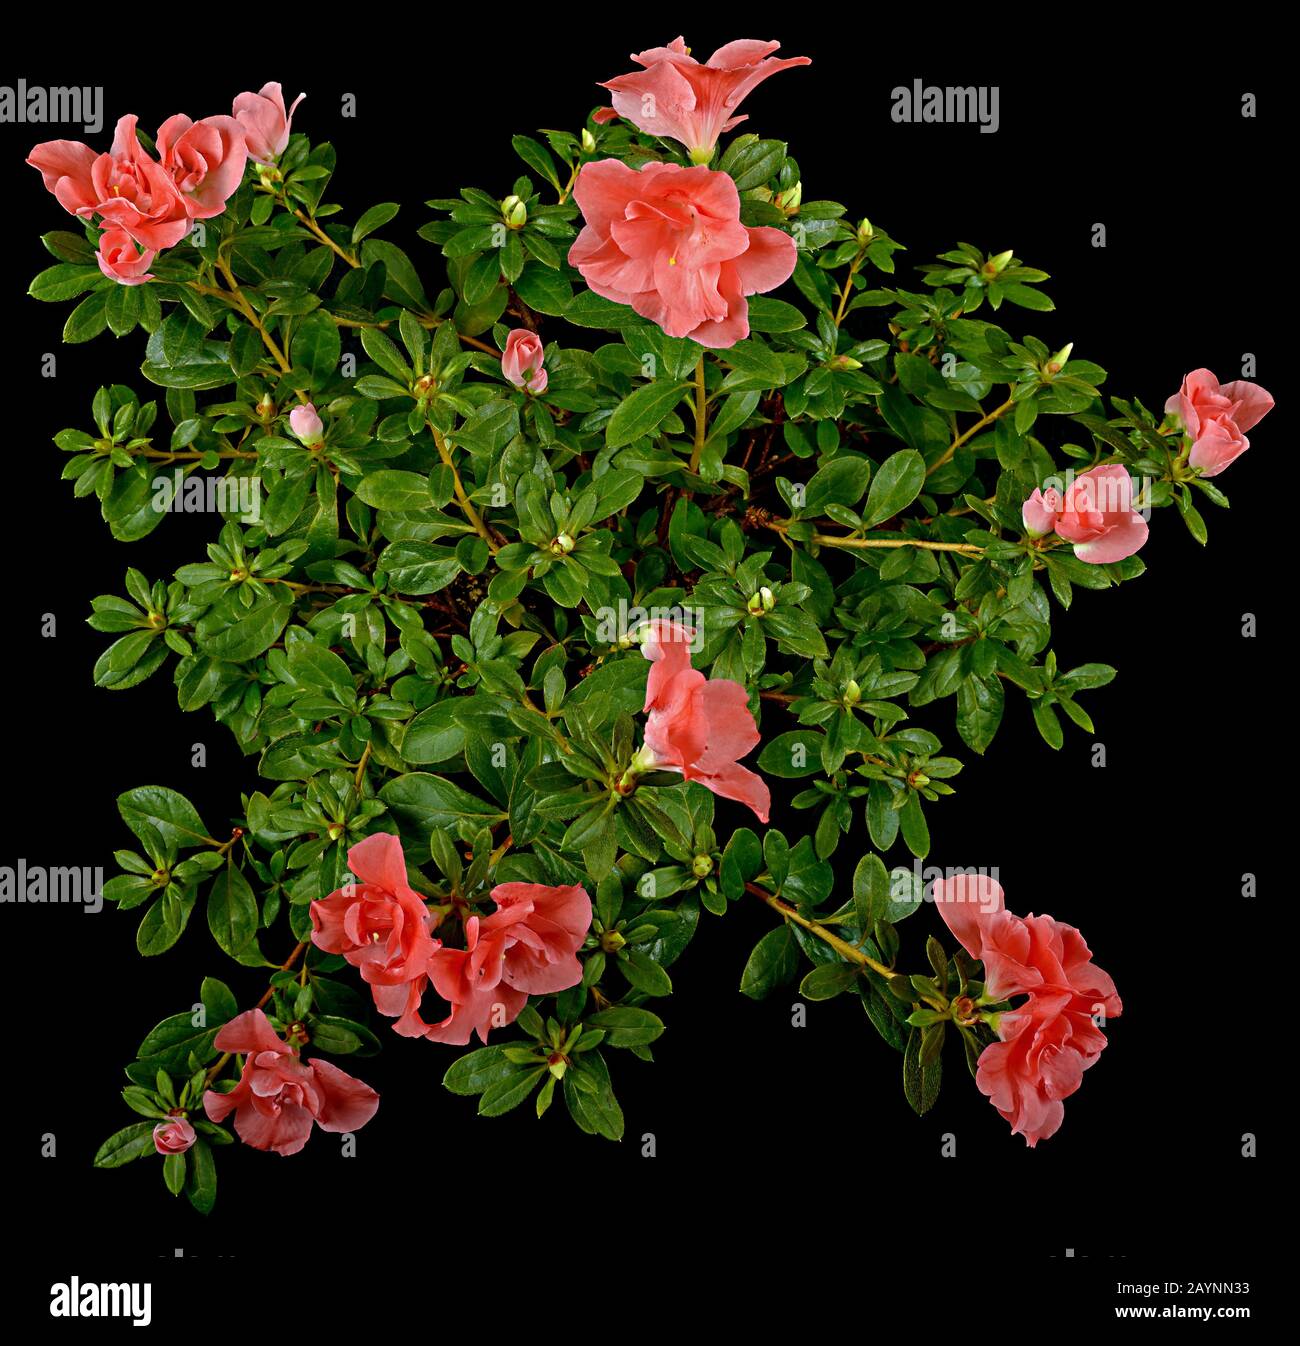 Pink unveiled flowers and buds of azalia with green and fluffy leaves. Stock Photo